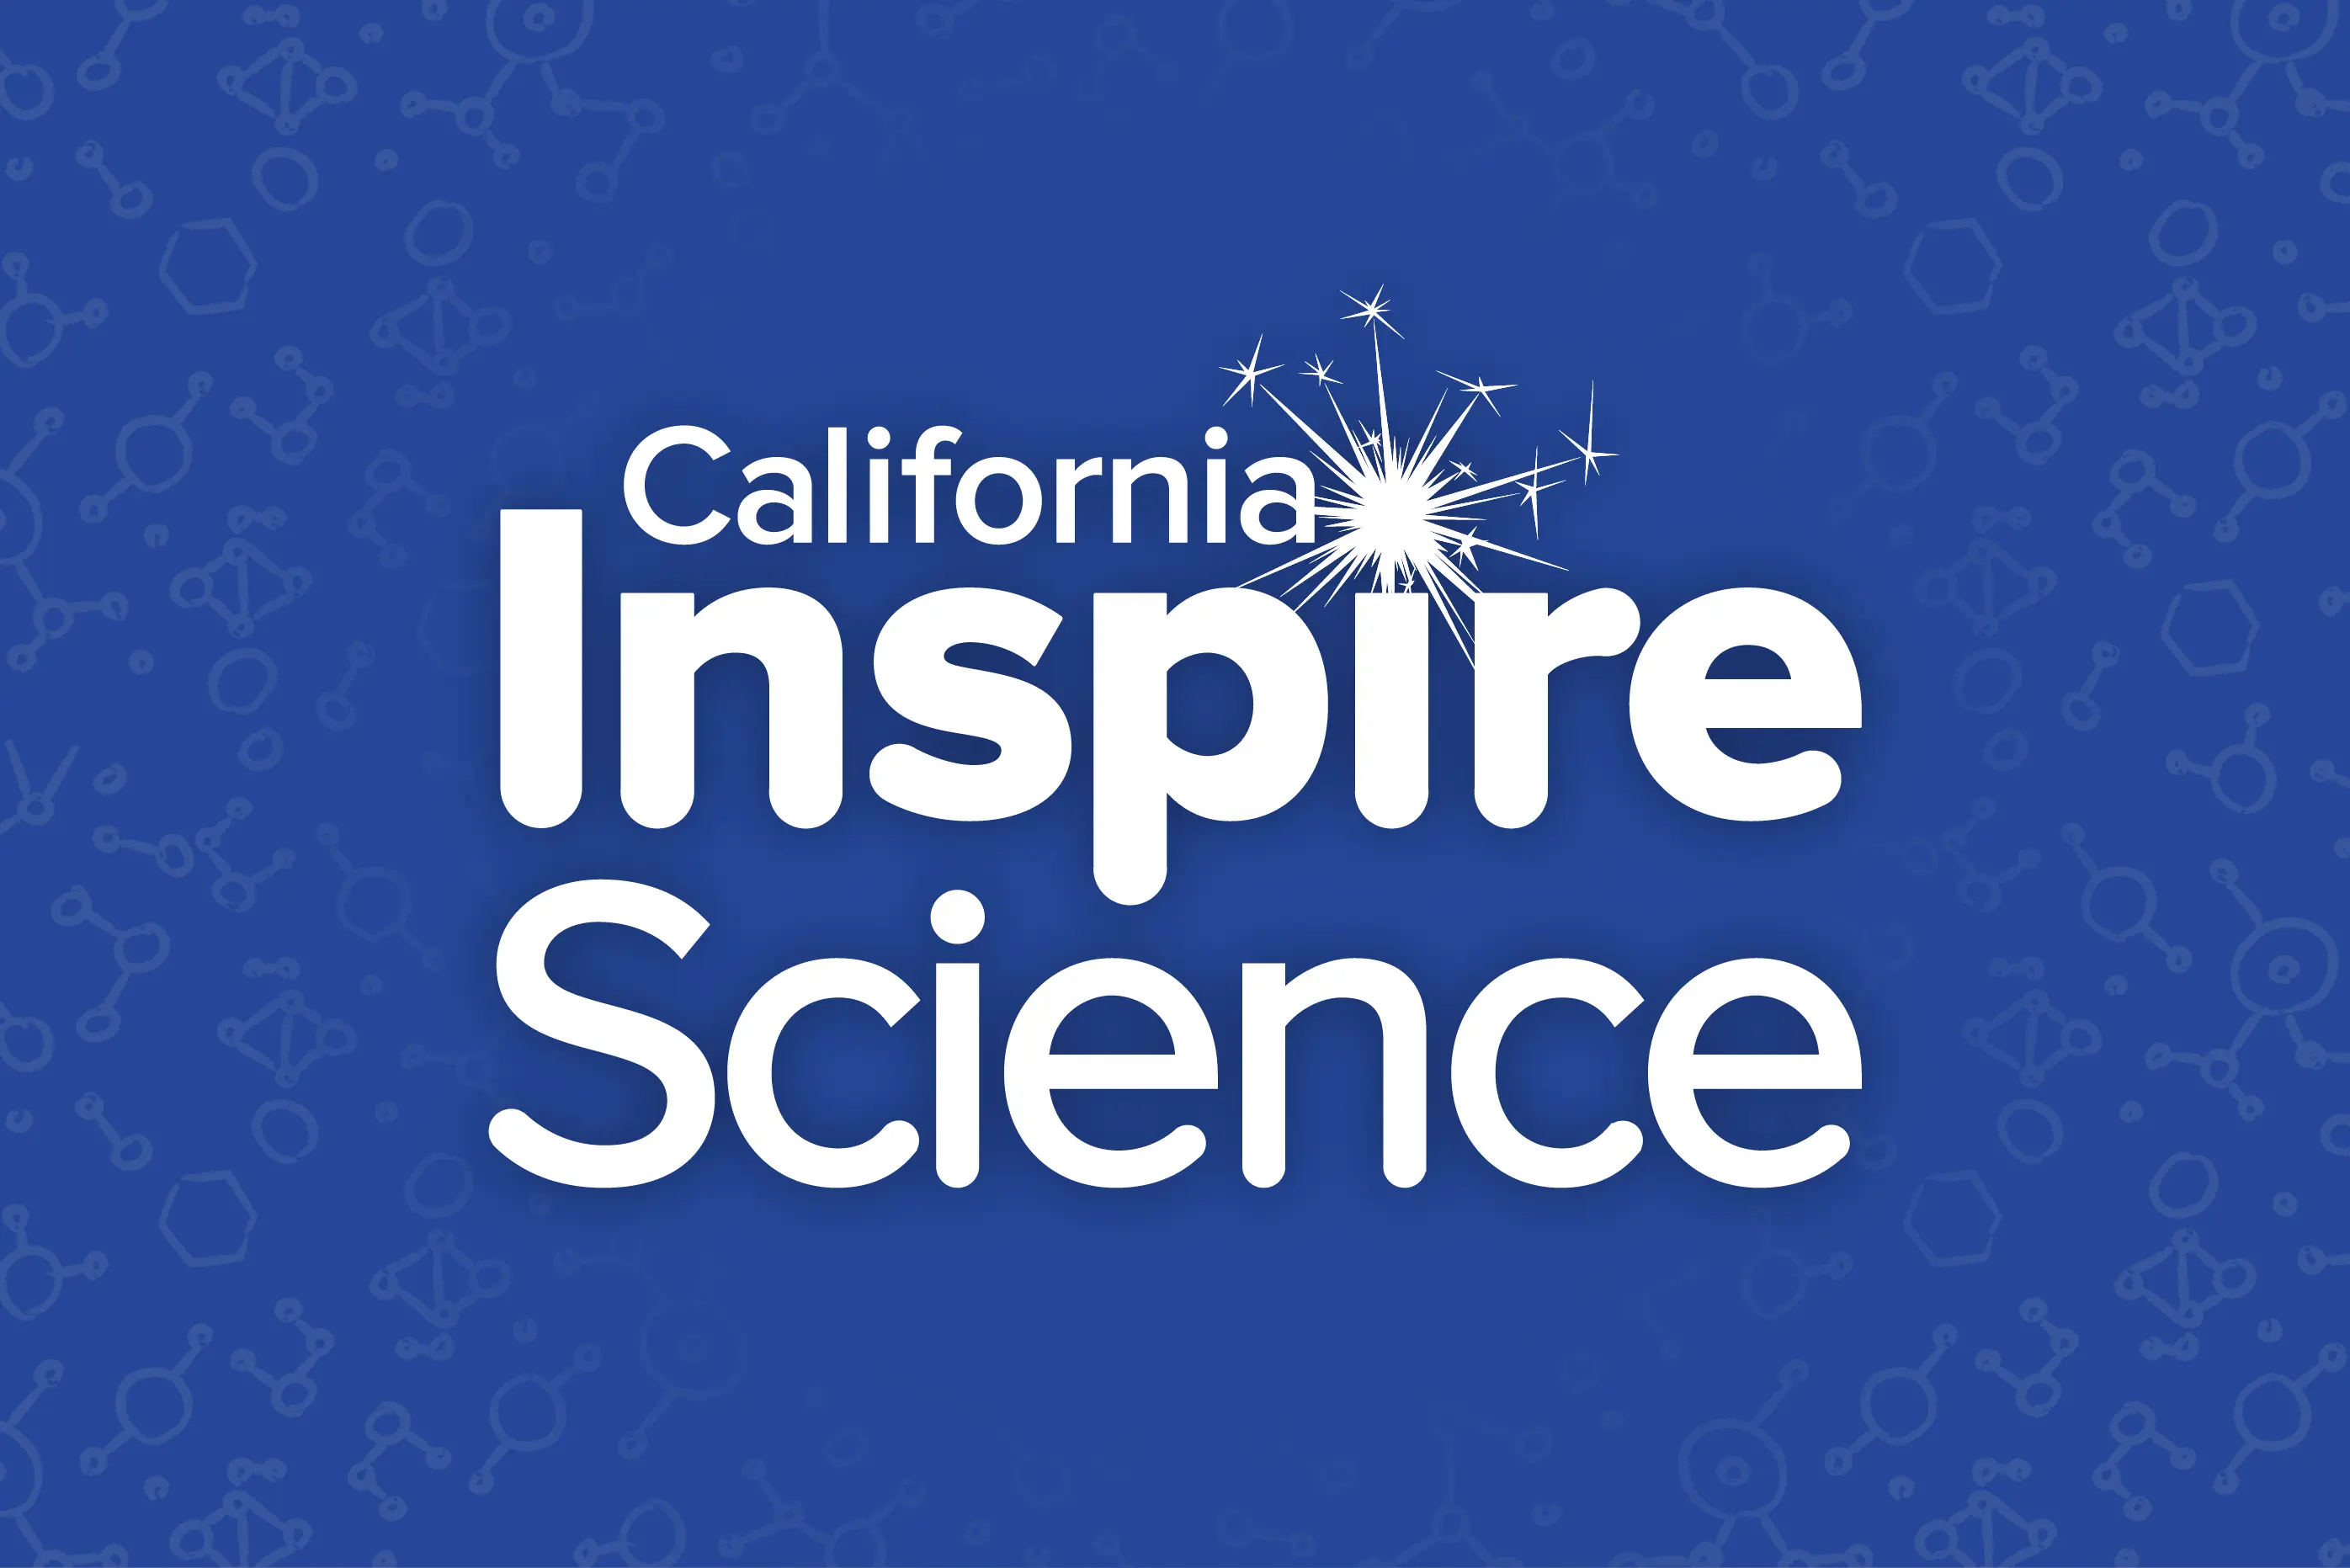 California Inspire Science on  a blue background that has feint molecule illustrations of varying bonds